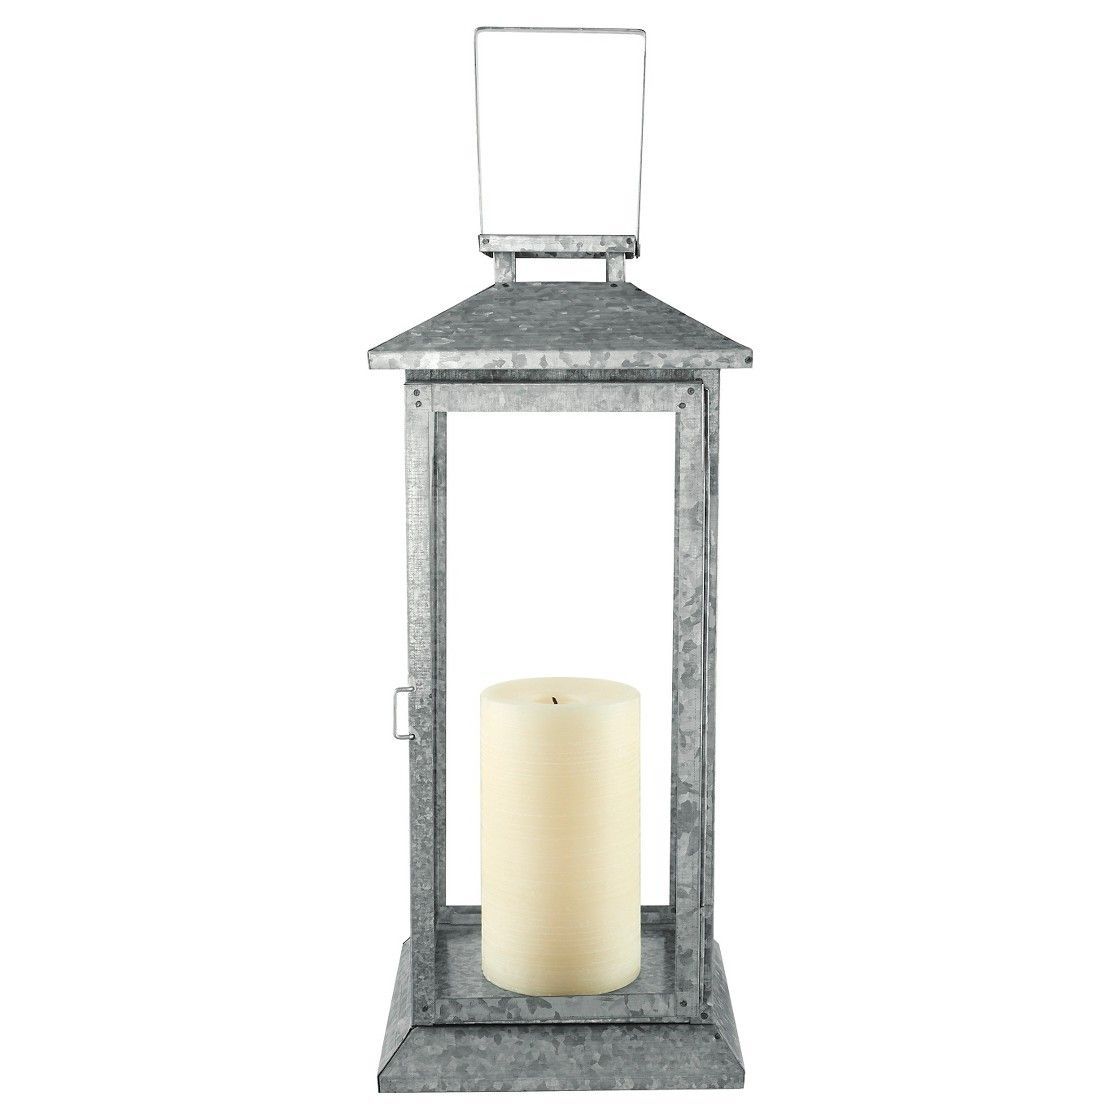 Outdoor Lanterns From Threshold At Target | Outdoorspaces Within Outdoor Lanterns At Target (Photo 14 of 20)